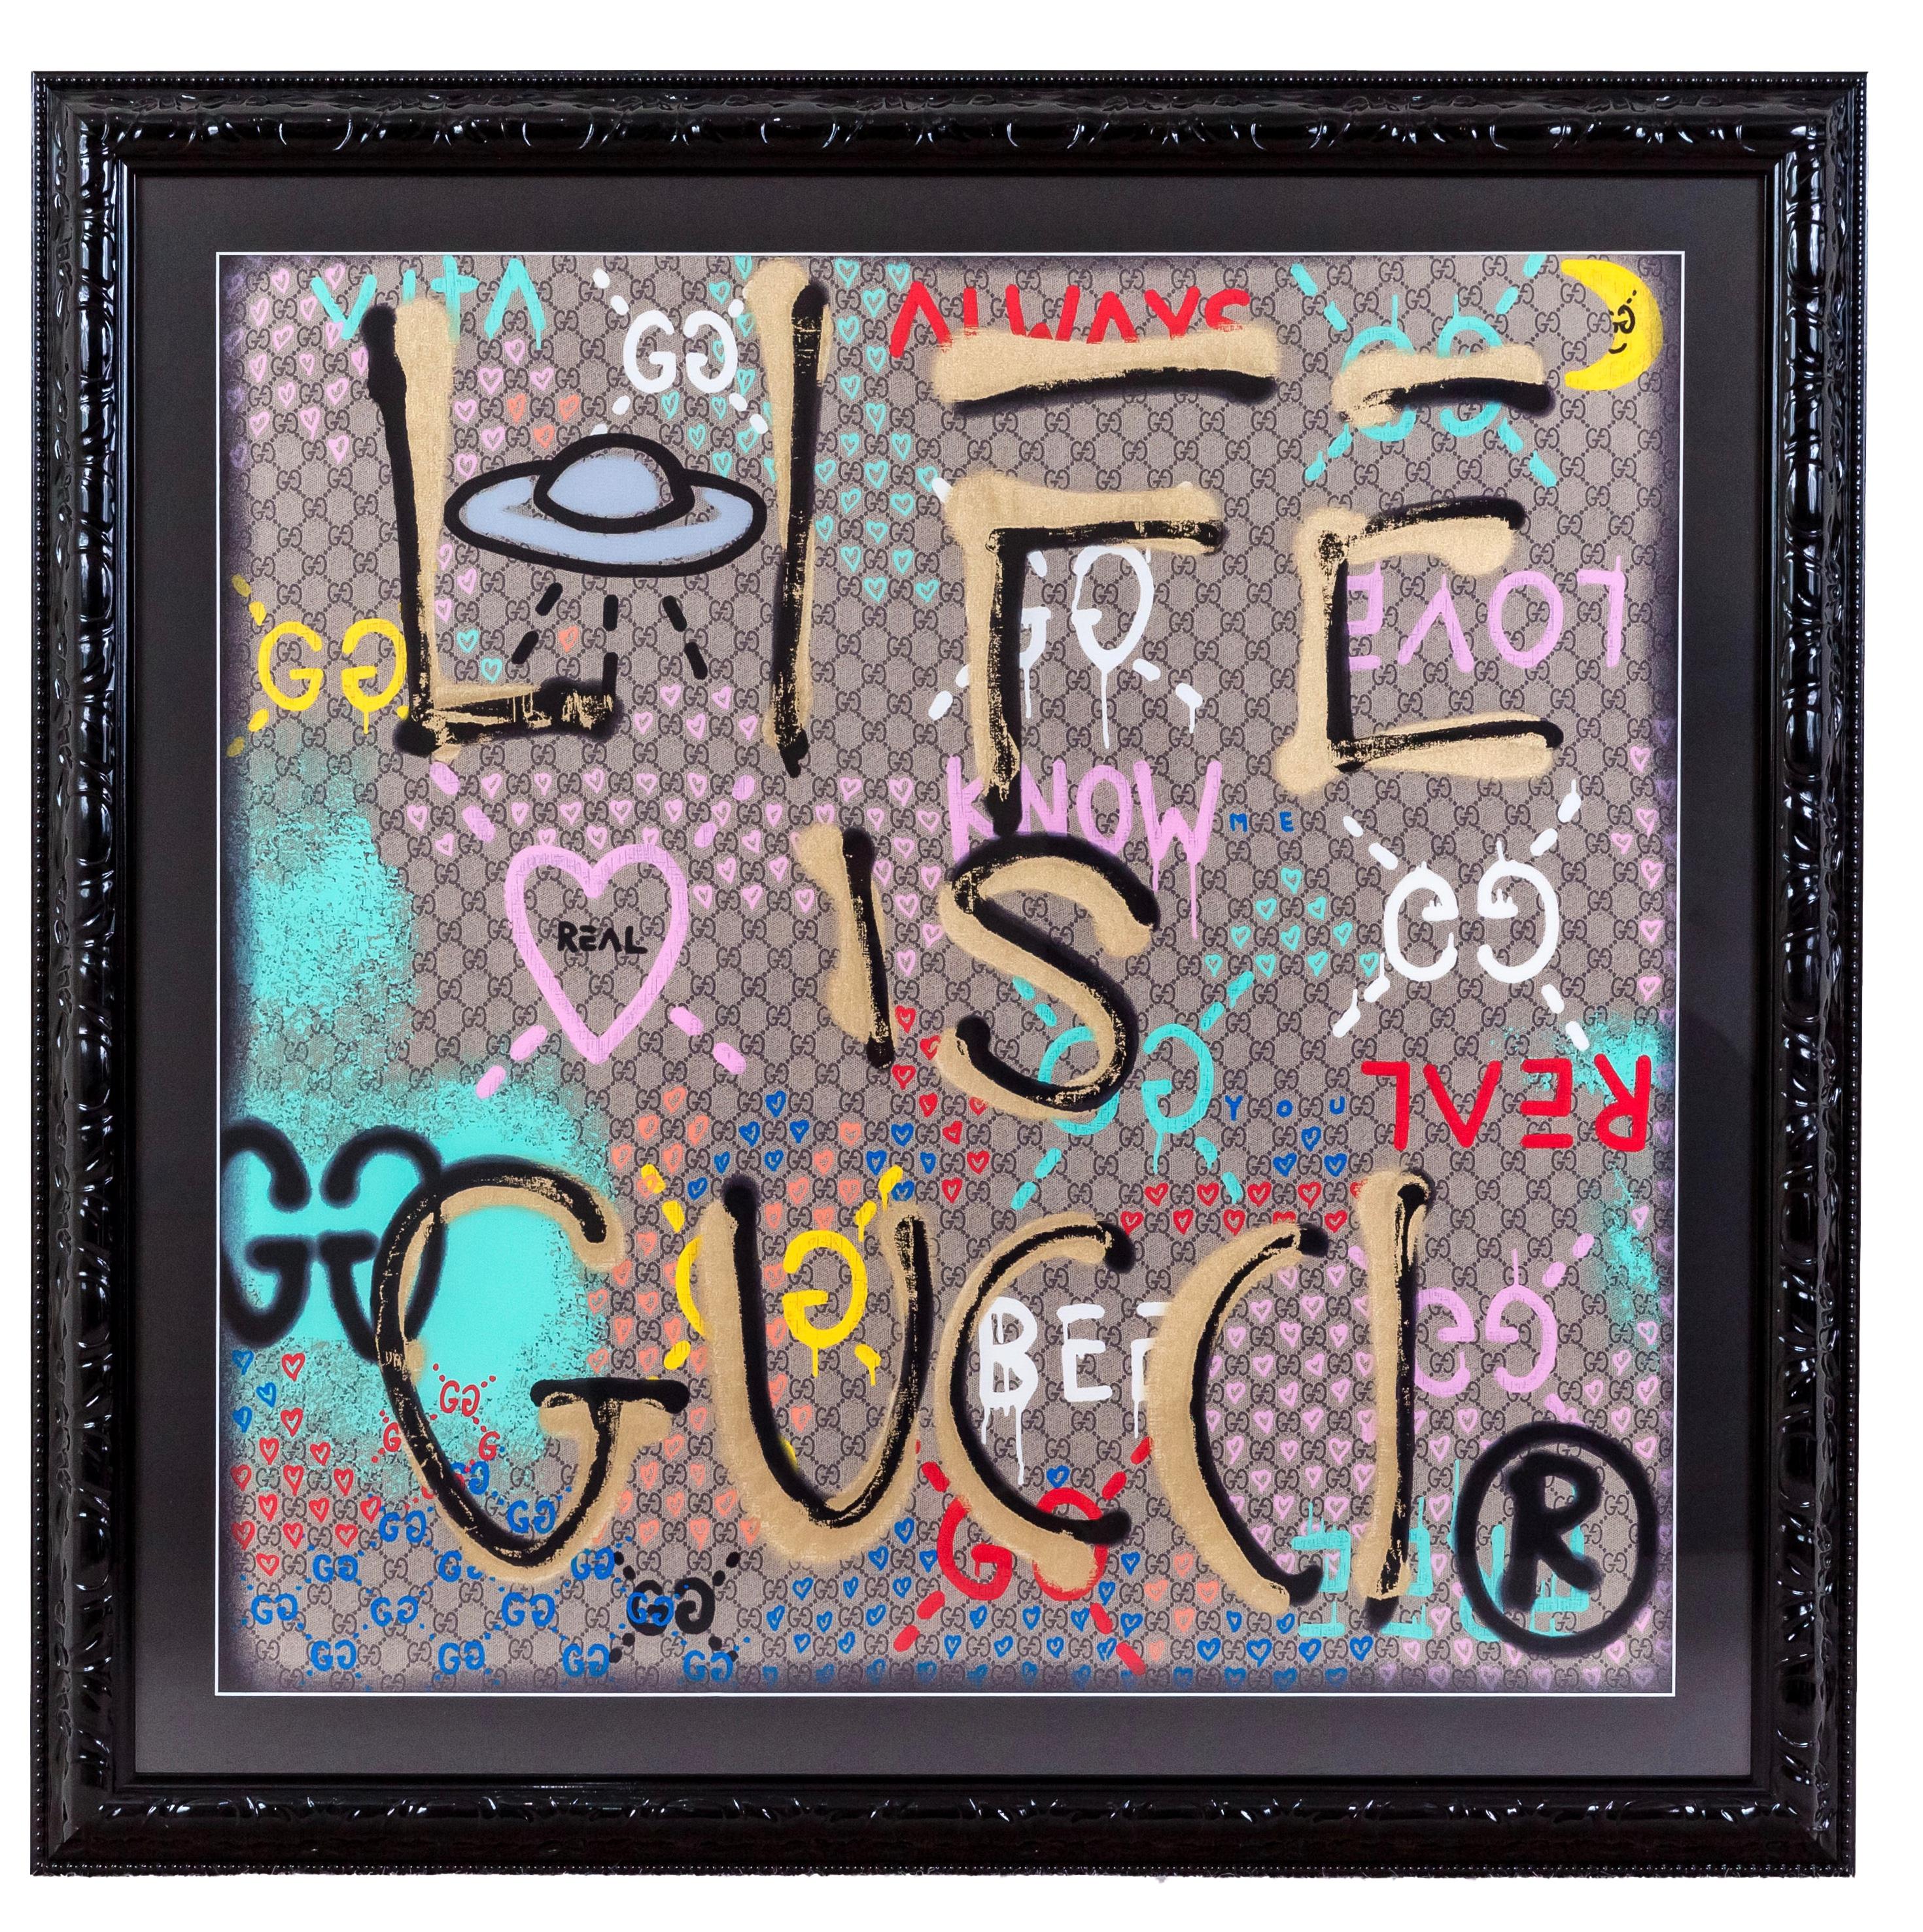 Gucci - Life is Gucci logo silk scarf in bespoke frame

Gucci's special range of accessories and ready-to-wear that feature their signature phrases. The ironic and witty handwritten aphorisms appear over the Gucci vintage logo This silk scarf is